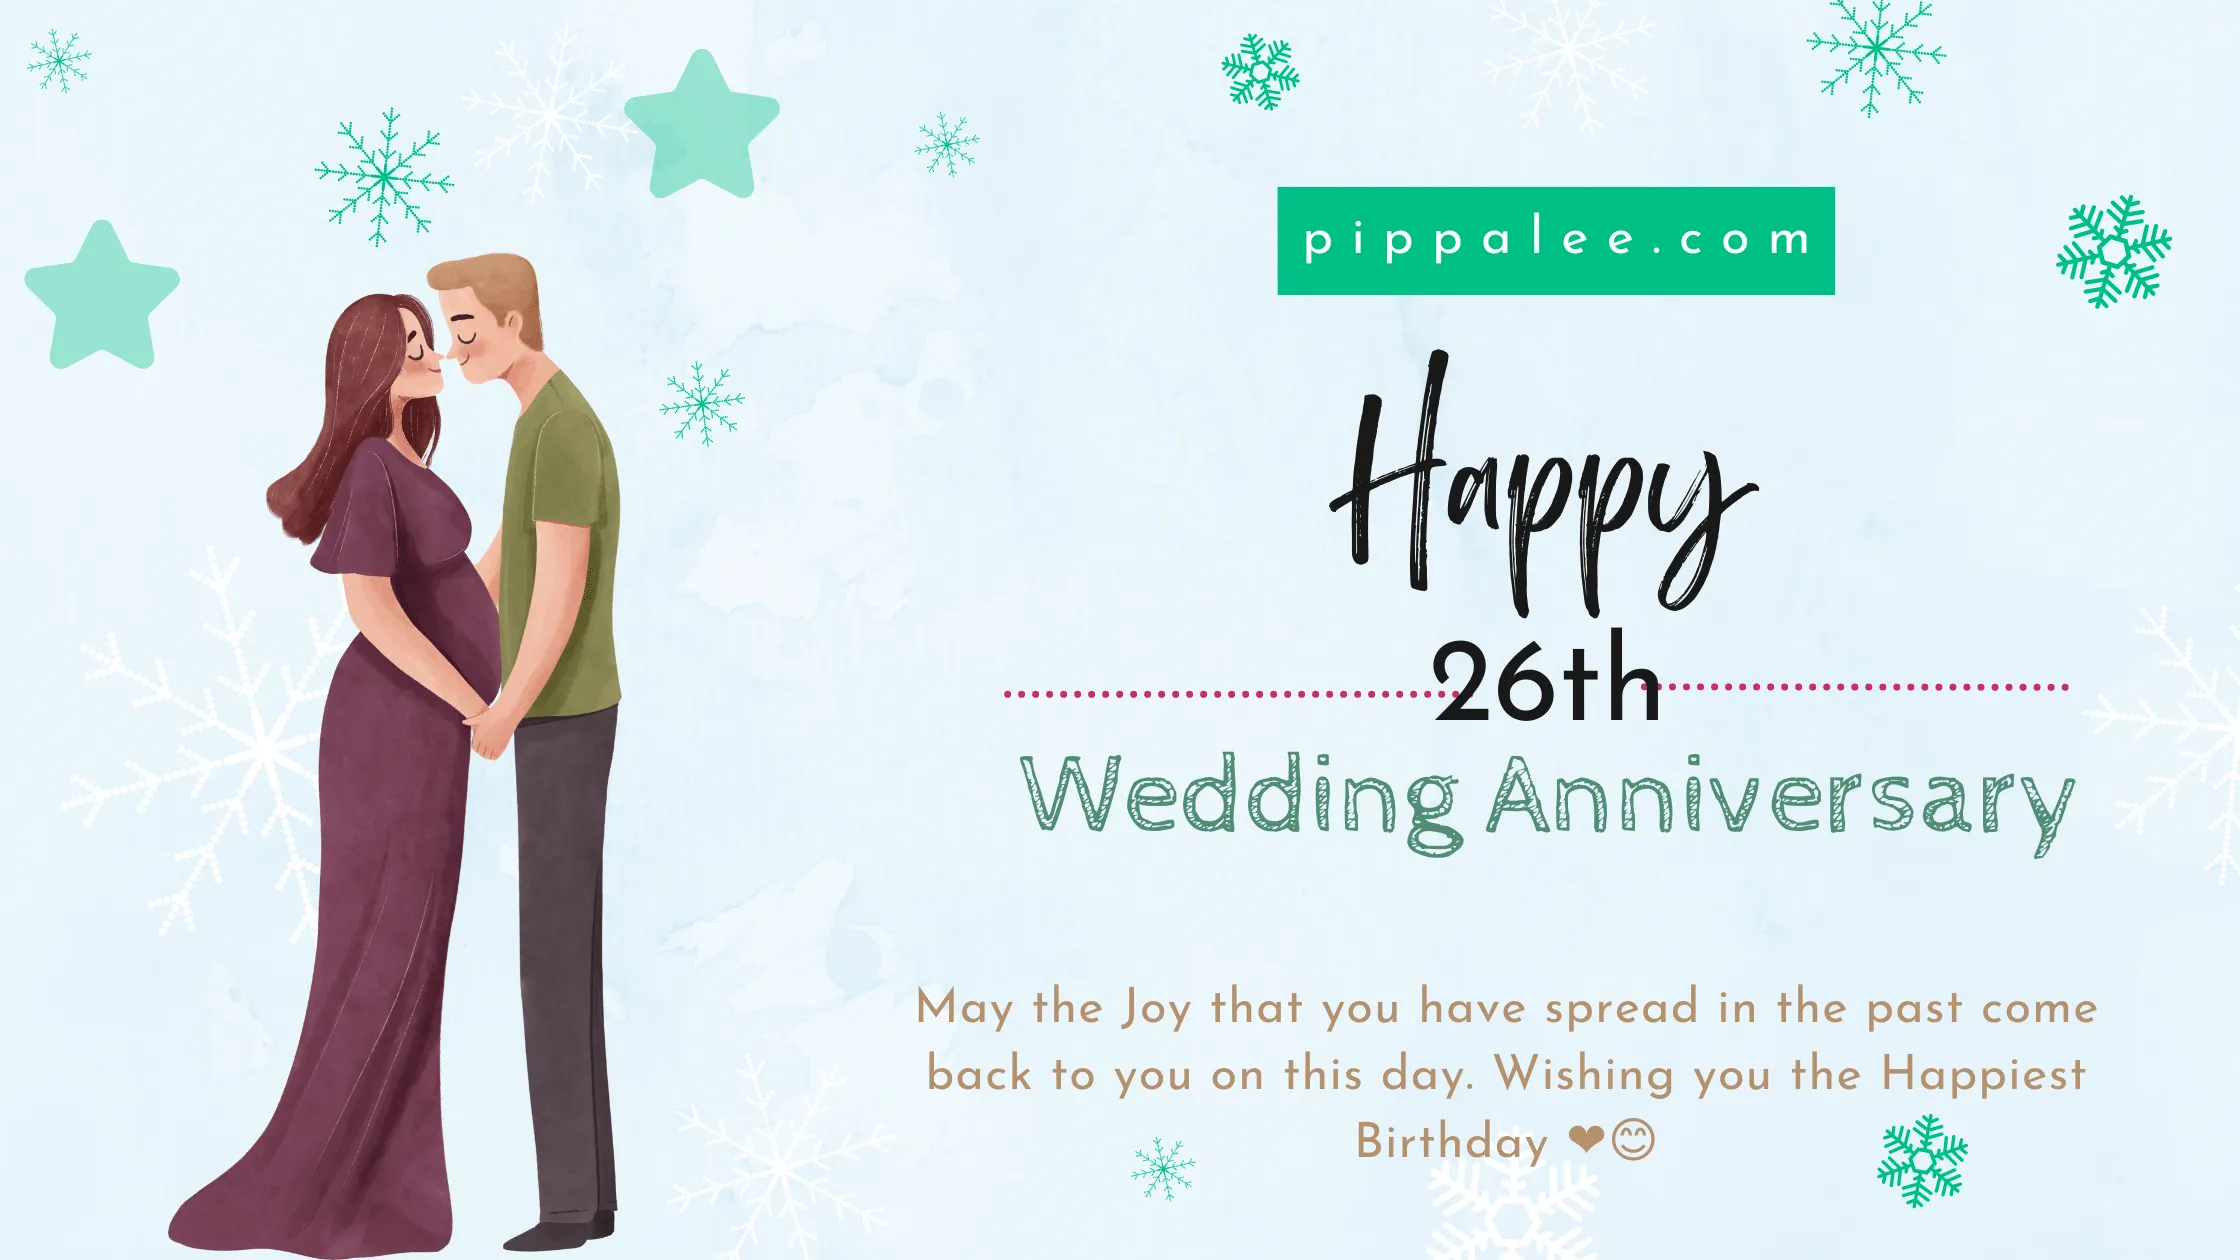 26th Wedding Anniversary - Wishes & Messages